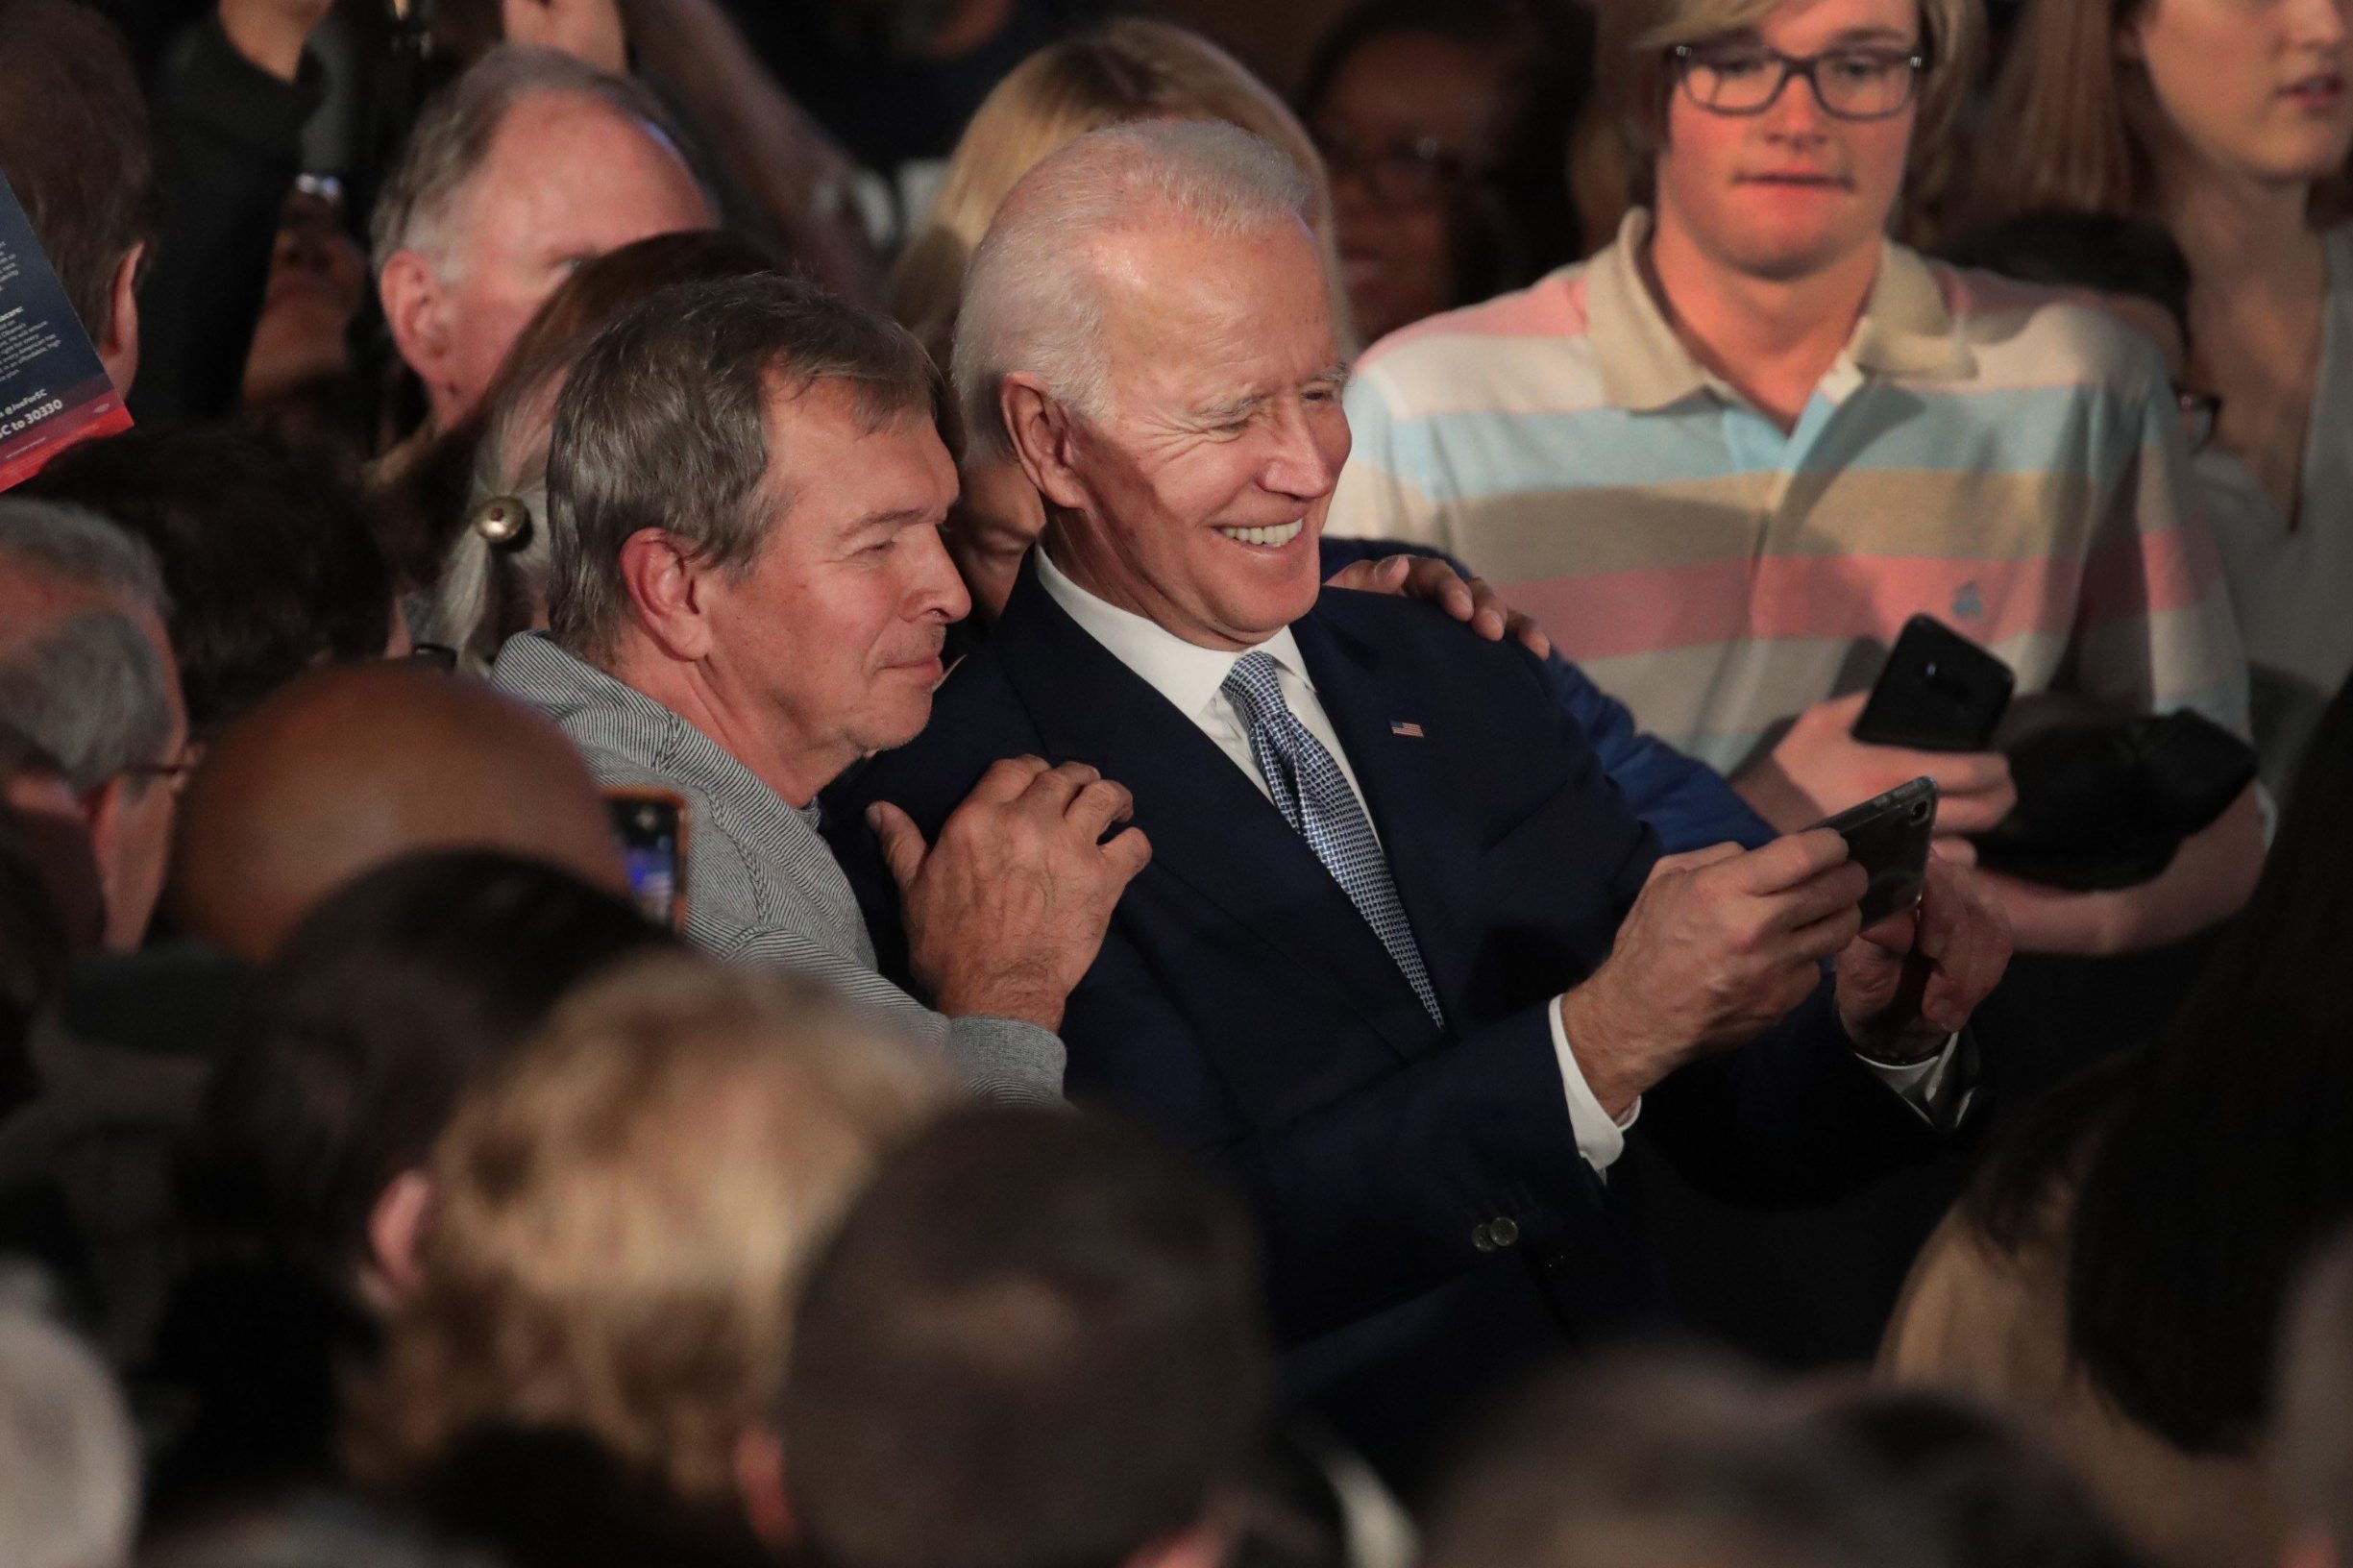 COLUMBIA, SOUTH CAROLINA - FEBRUARY 29: Democratic presidential candidate former Vice President Joe Biden celebrates with his supporters after declaring victory at an election-night rally at the University of South Carolina Volleyball Center on February 29, 2020 in Columbia, South Carolina. The next big contest for the Democratic candidates will be Super Tuesday on March 3, when 14 states and American Samoa go to the polls.   Scott Olson/Getty Images/AFP
== FOR NEWSPAPERS, INTERNET, TELCOS & TELEVISION USE ONLY ==